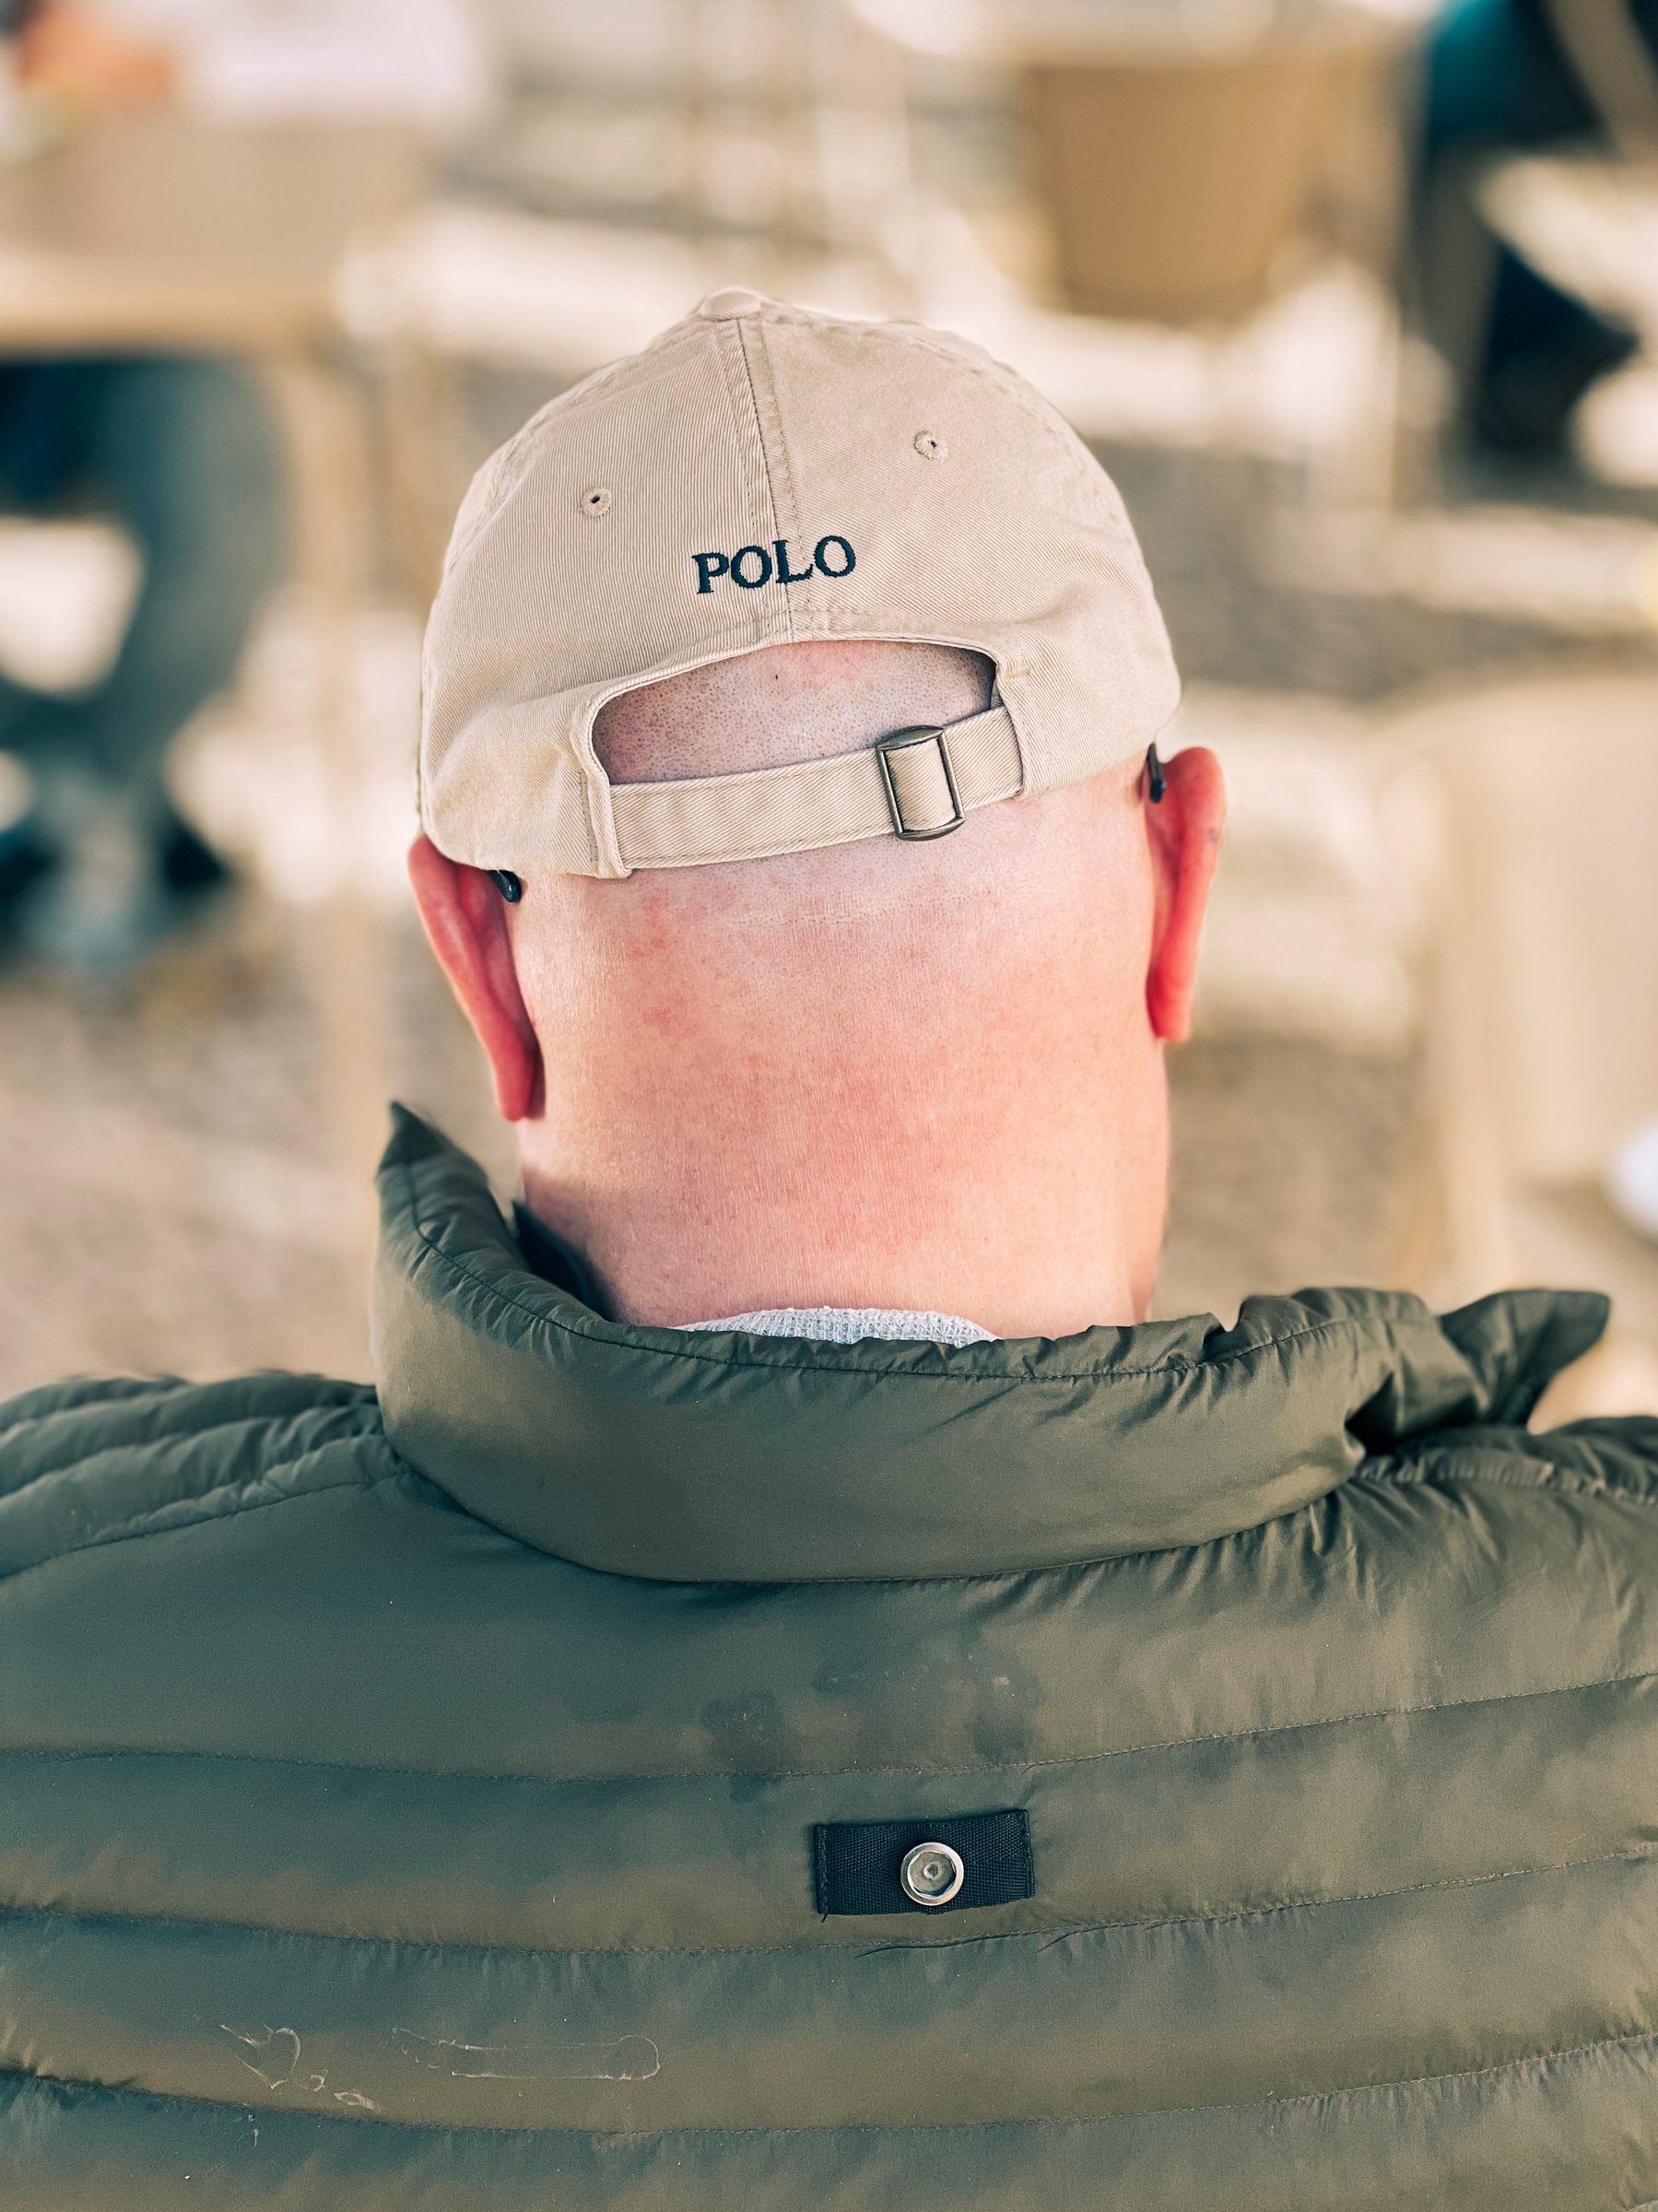 A person from behind wearing a beige baseball cap and a green quilted jacket. The person&rsquo;s neck shows signs of sunburn.